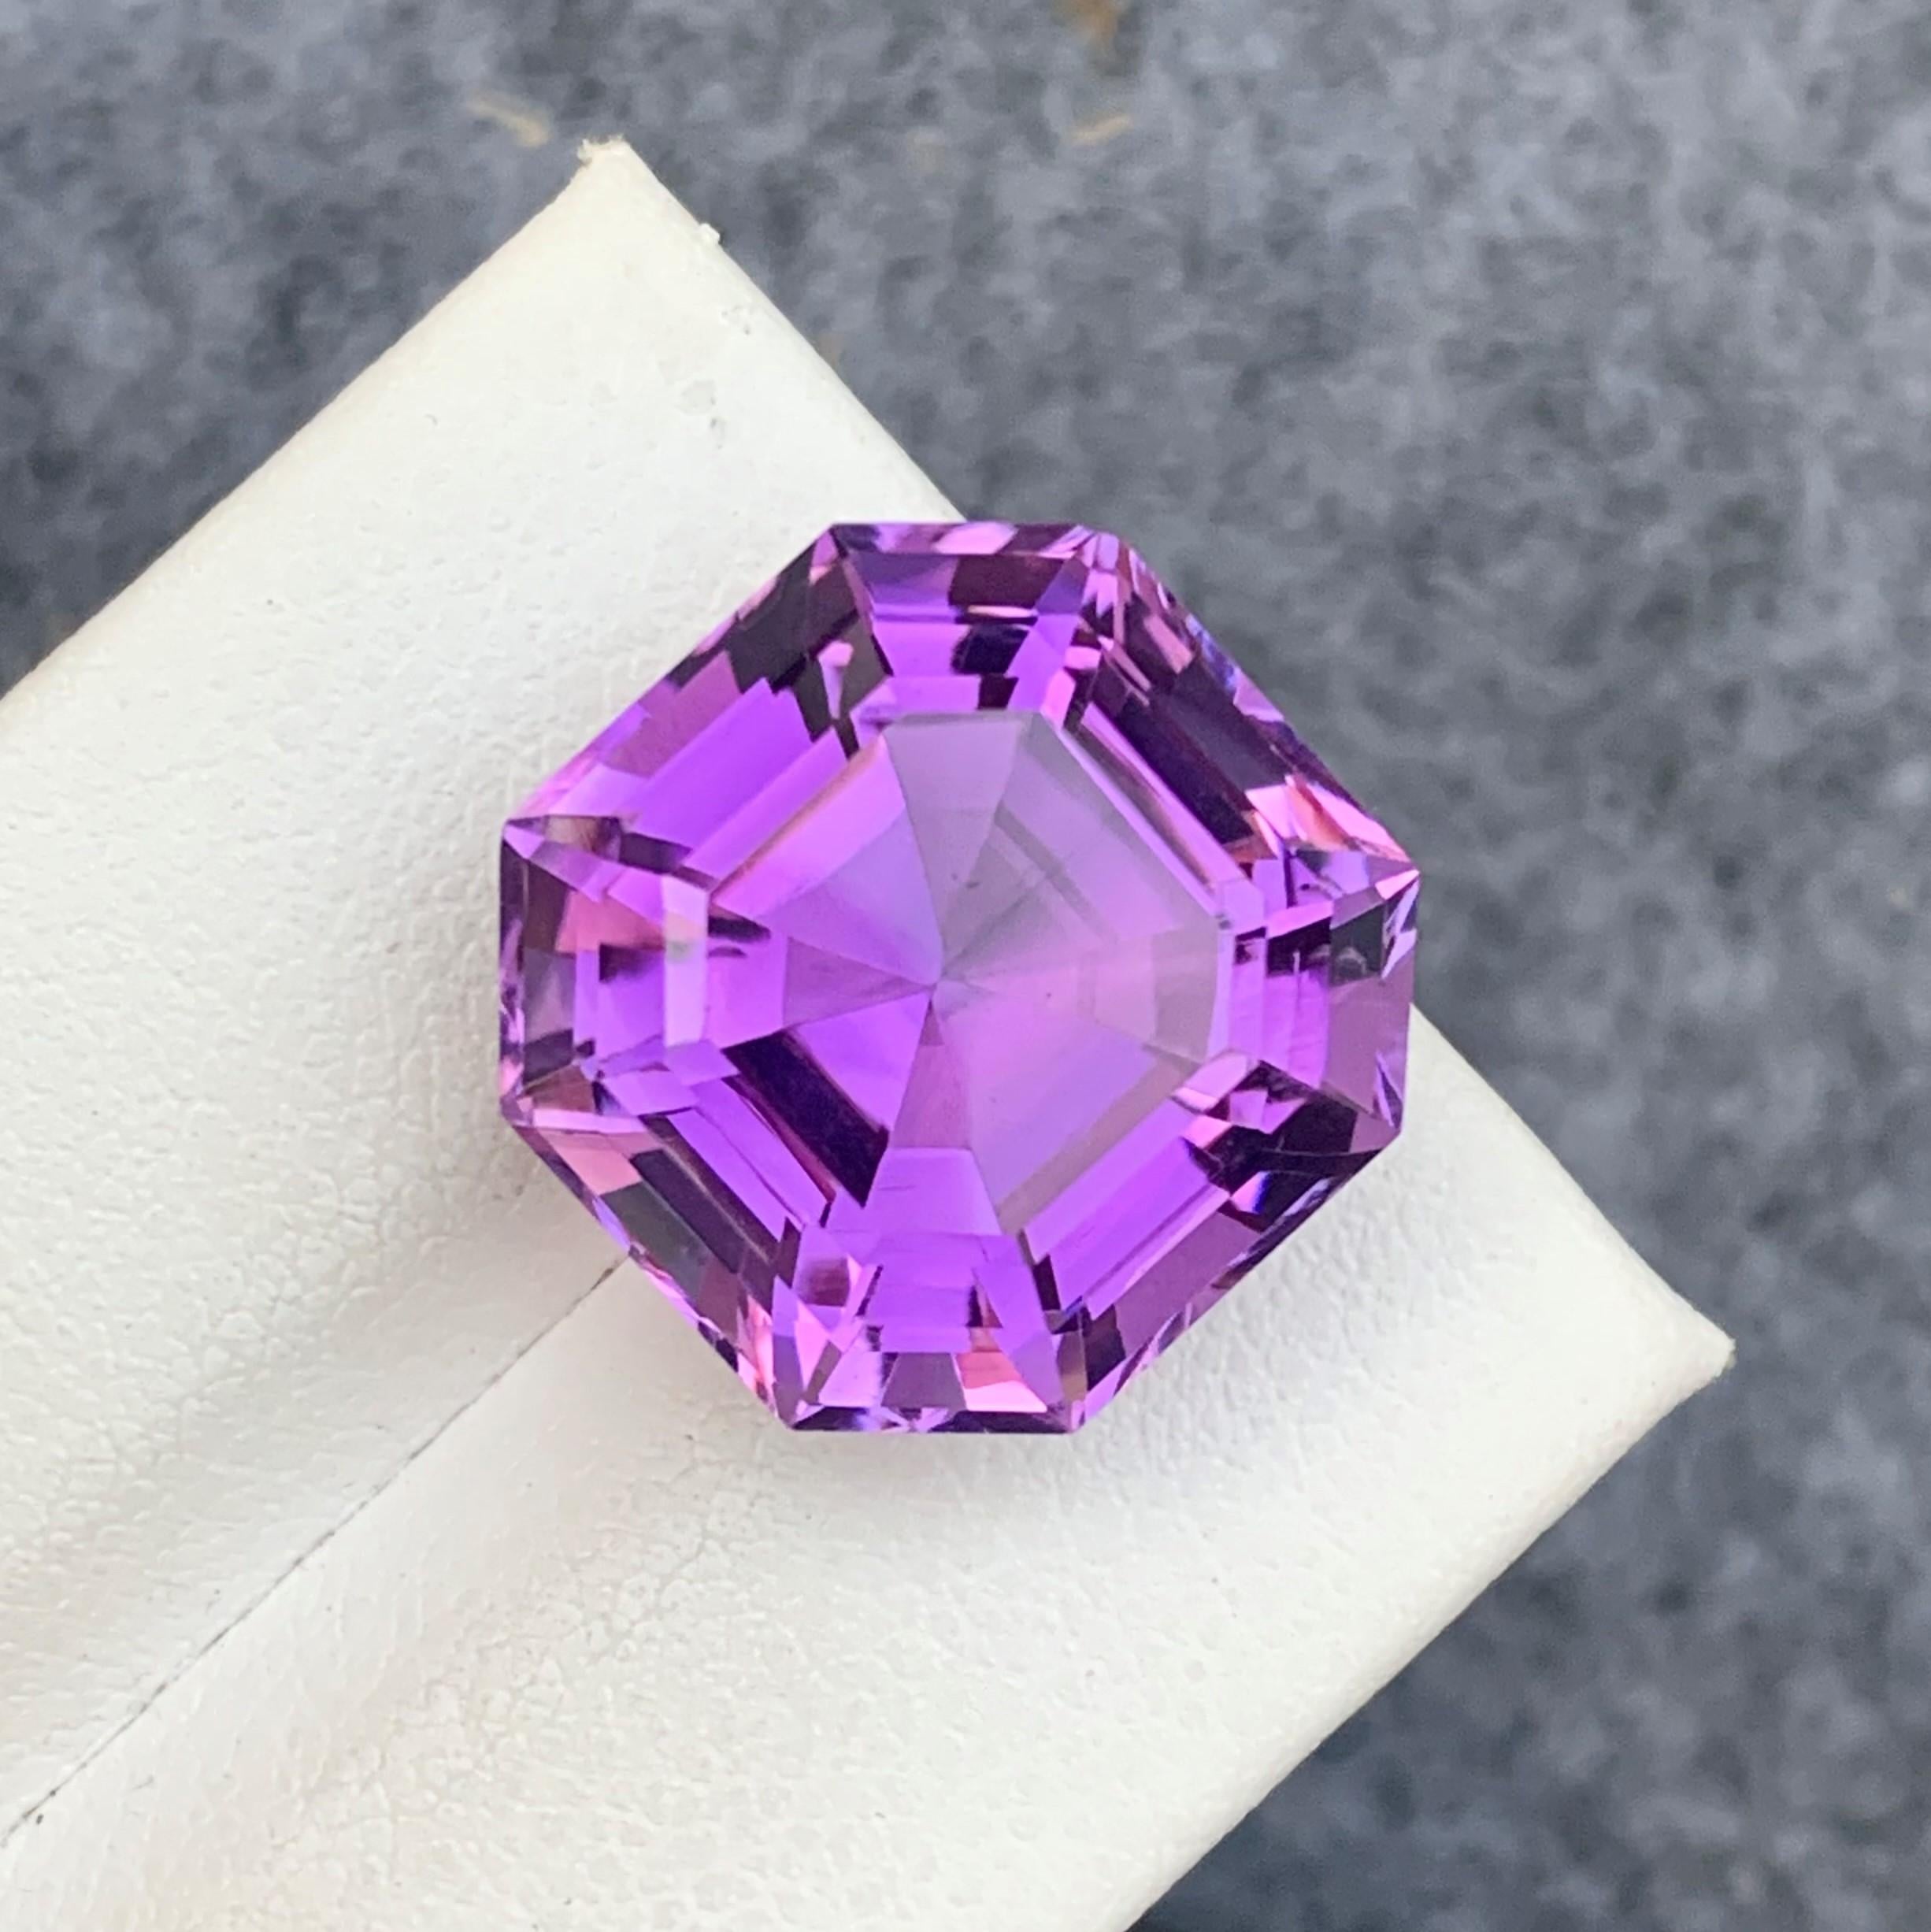 Gemstone Type : Amethyst
Weight : 16.55 Carats
Dimensions : 15.7X15.5X11.4 mm
Clarity : Loupe Clean
Origin : Brazil
Color: Purple
Shape: Asscher 
Certificate: On Demand
Month: February
Purported amethyst powers for healing
enhancing the immune